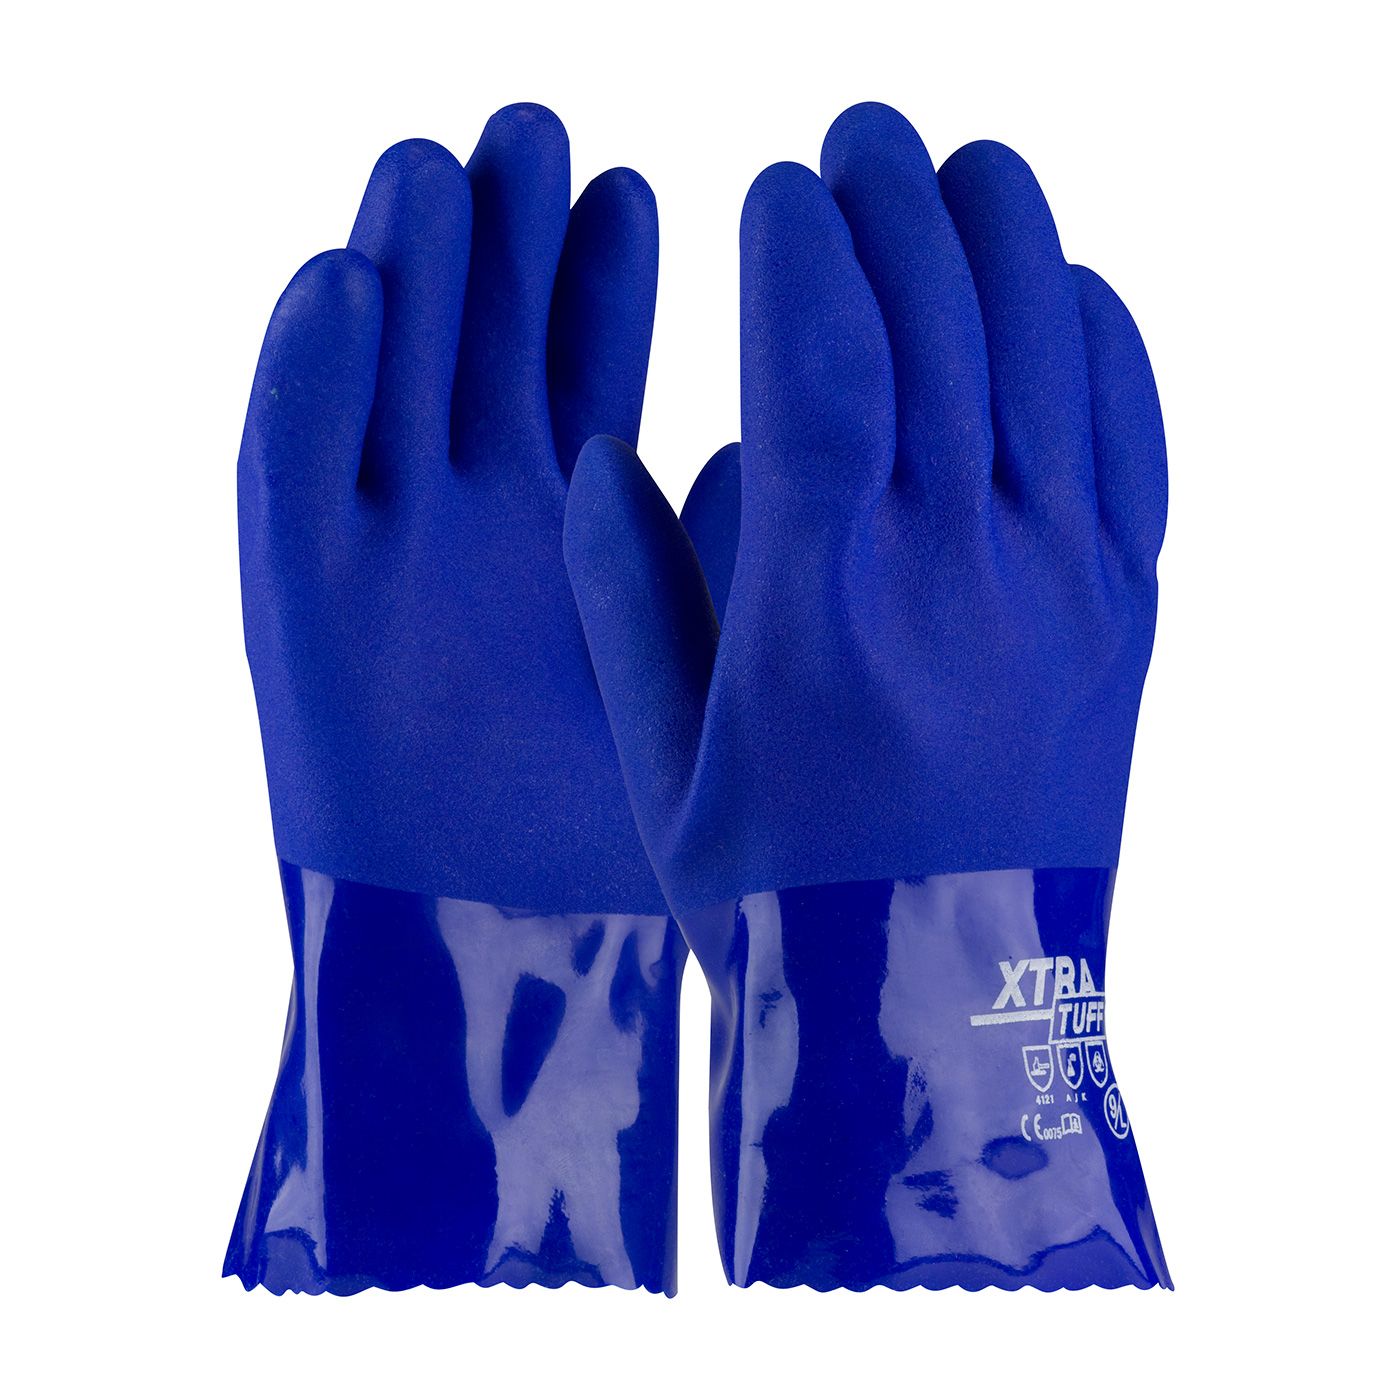 XtraTuff™ Oil Resistant PVC Coated Glove with Seamless Liner and Rough Finish - Spill Control